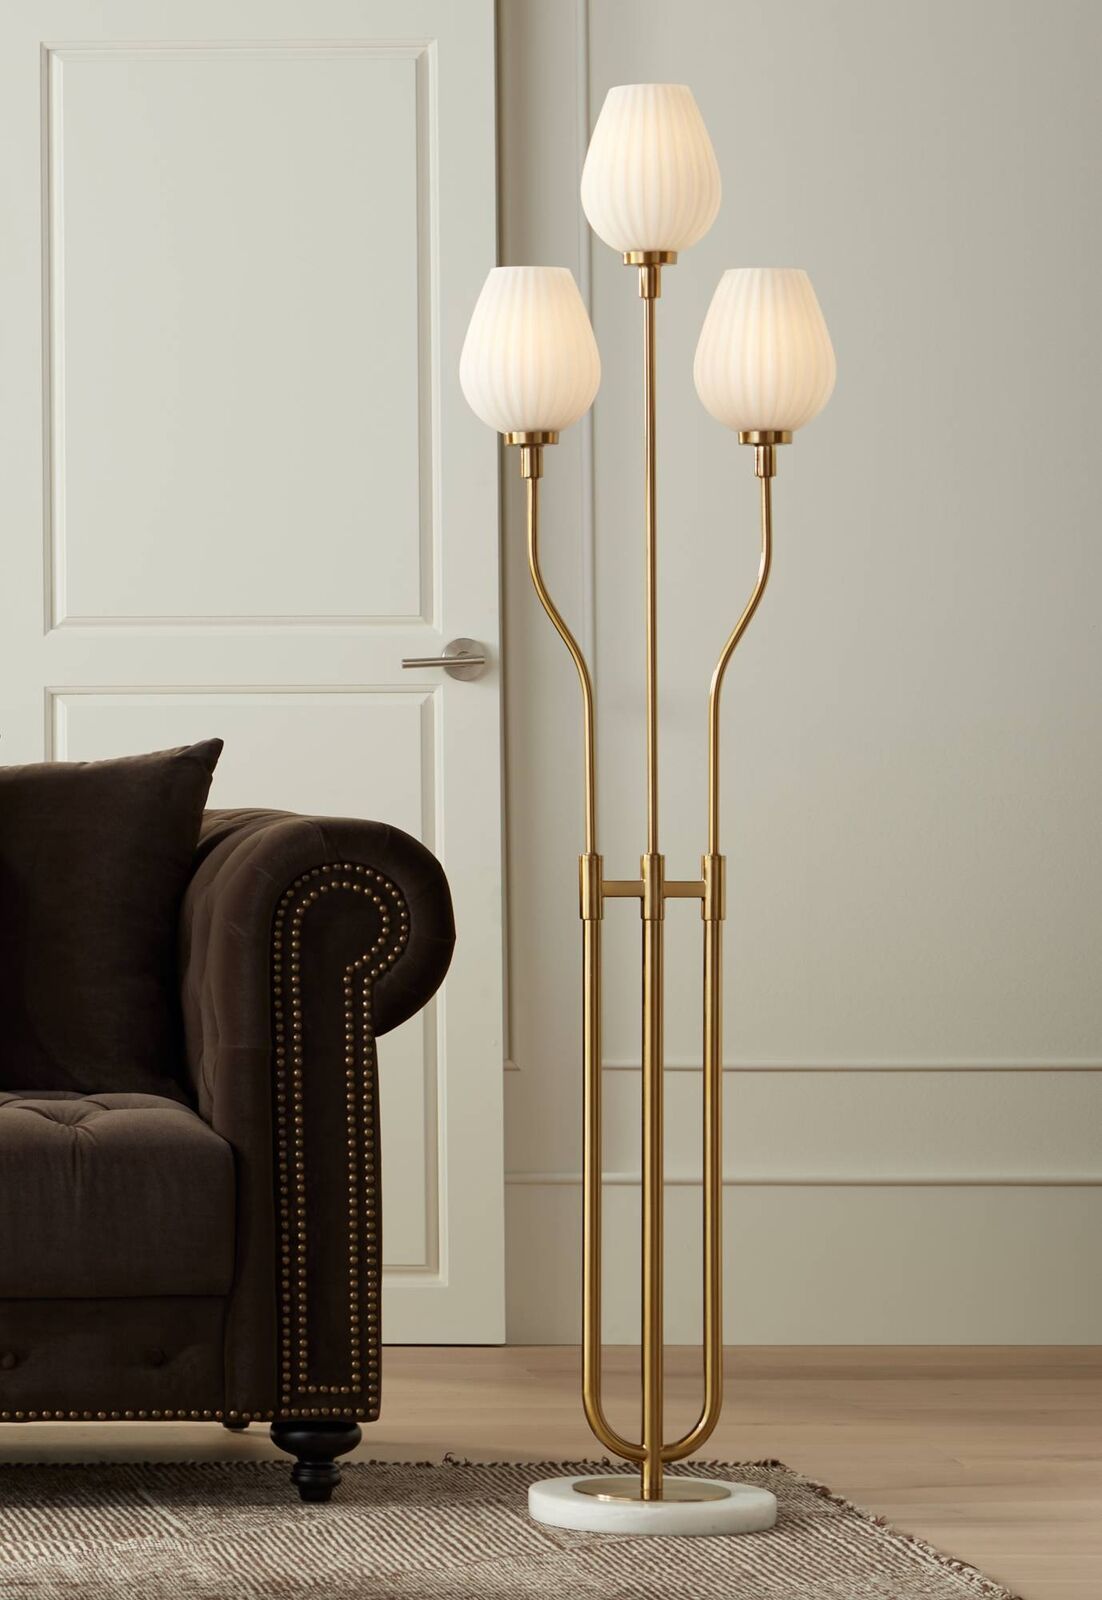 Modern Tree Floor Lamp 65" Tall Gold 3 Light Ribbed Glass For Living  Room House | Ebay Within 3 Light Tree Floor Lamps (View 13 of 15)